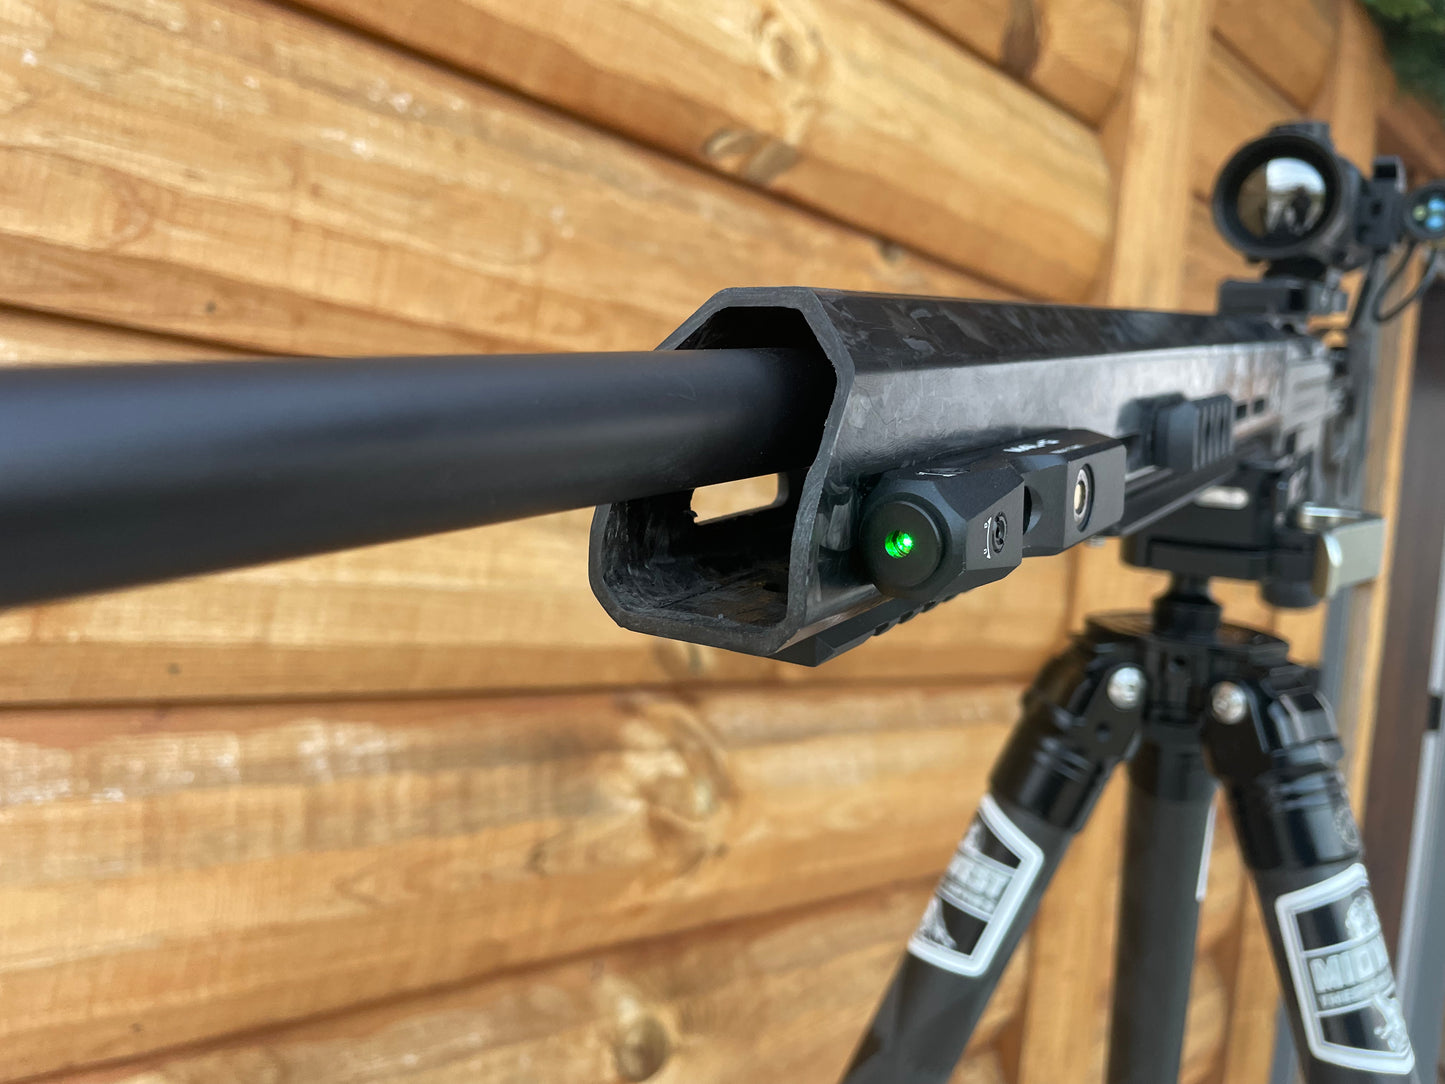 Green Laser Sight Compatible with M-Lok Rail Surface, Ultra Low-Profile Tactical Rifle Laser Sight with Strobe Function Magnetic